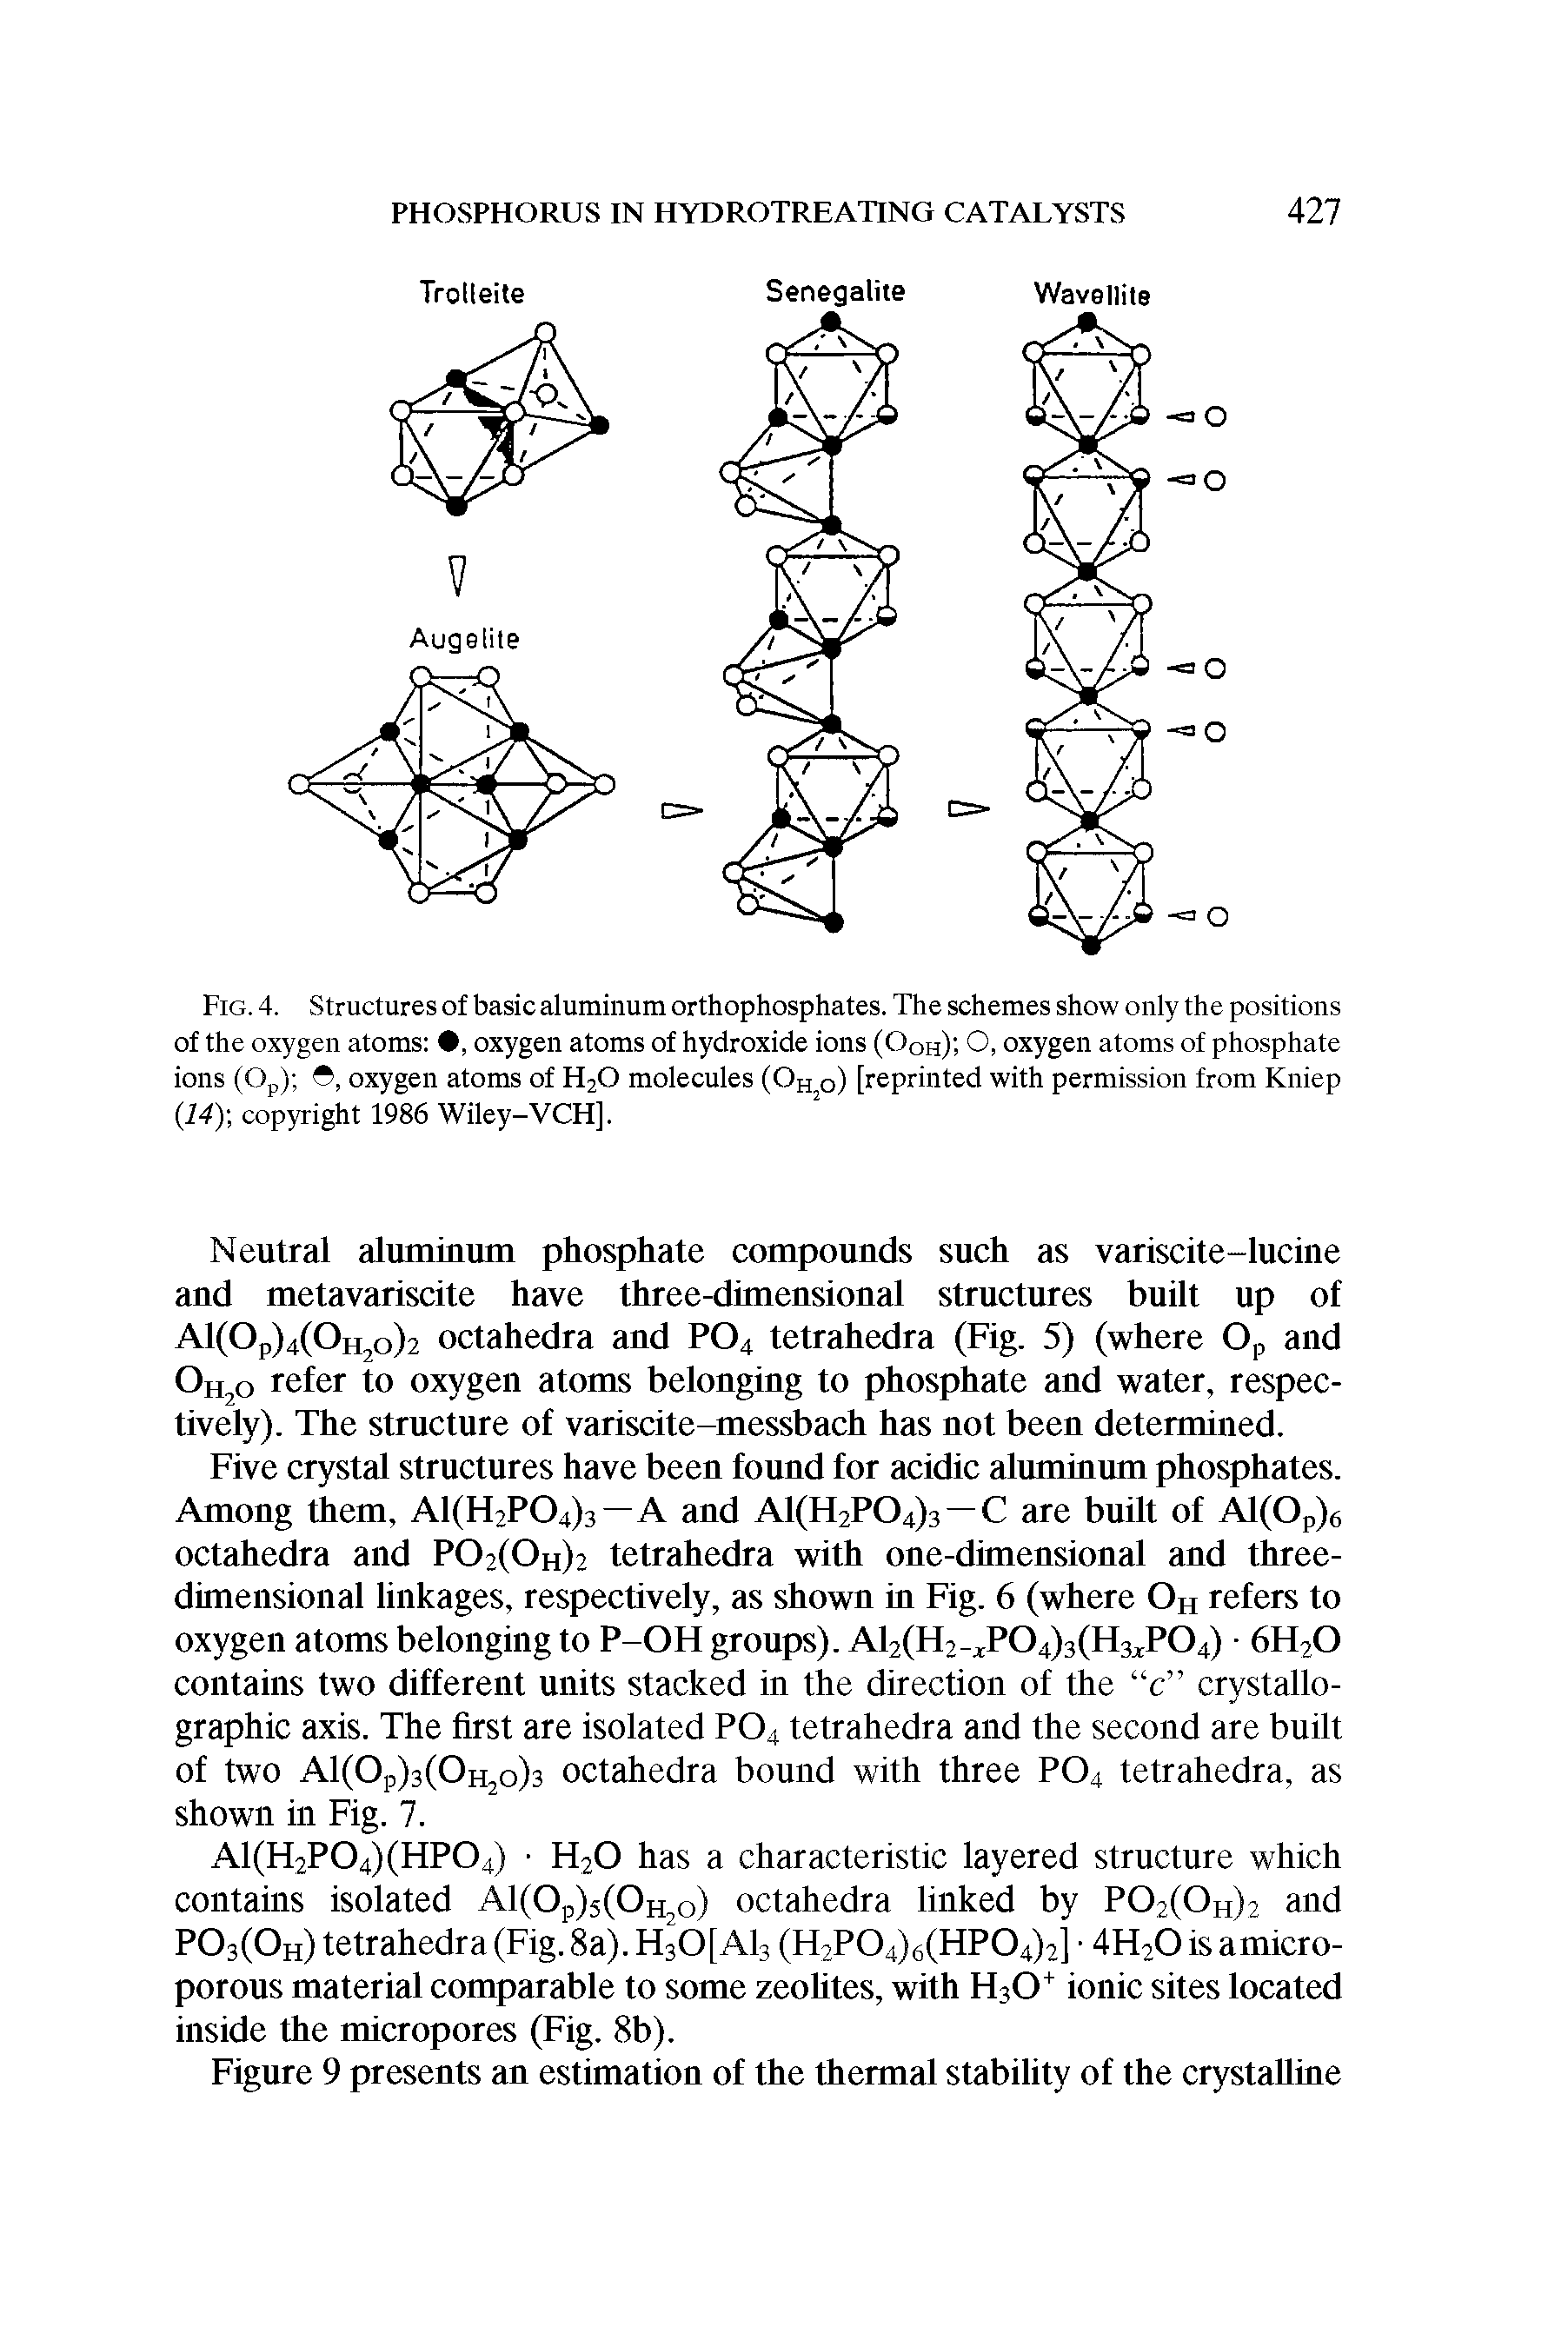 Fig. 4. Structures of basic aluminum orthophosphates. The schemes show only the positions of the oxygen atoms , oxygen atoms of hydroxide ions (Oqh) O, oxygen atoms of phosphate ions (0 ) , oxygen atoms of H O molecules (Oh o) [reprinted with permission from Kniep 14) copyright 1986 Wiley-VCH].